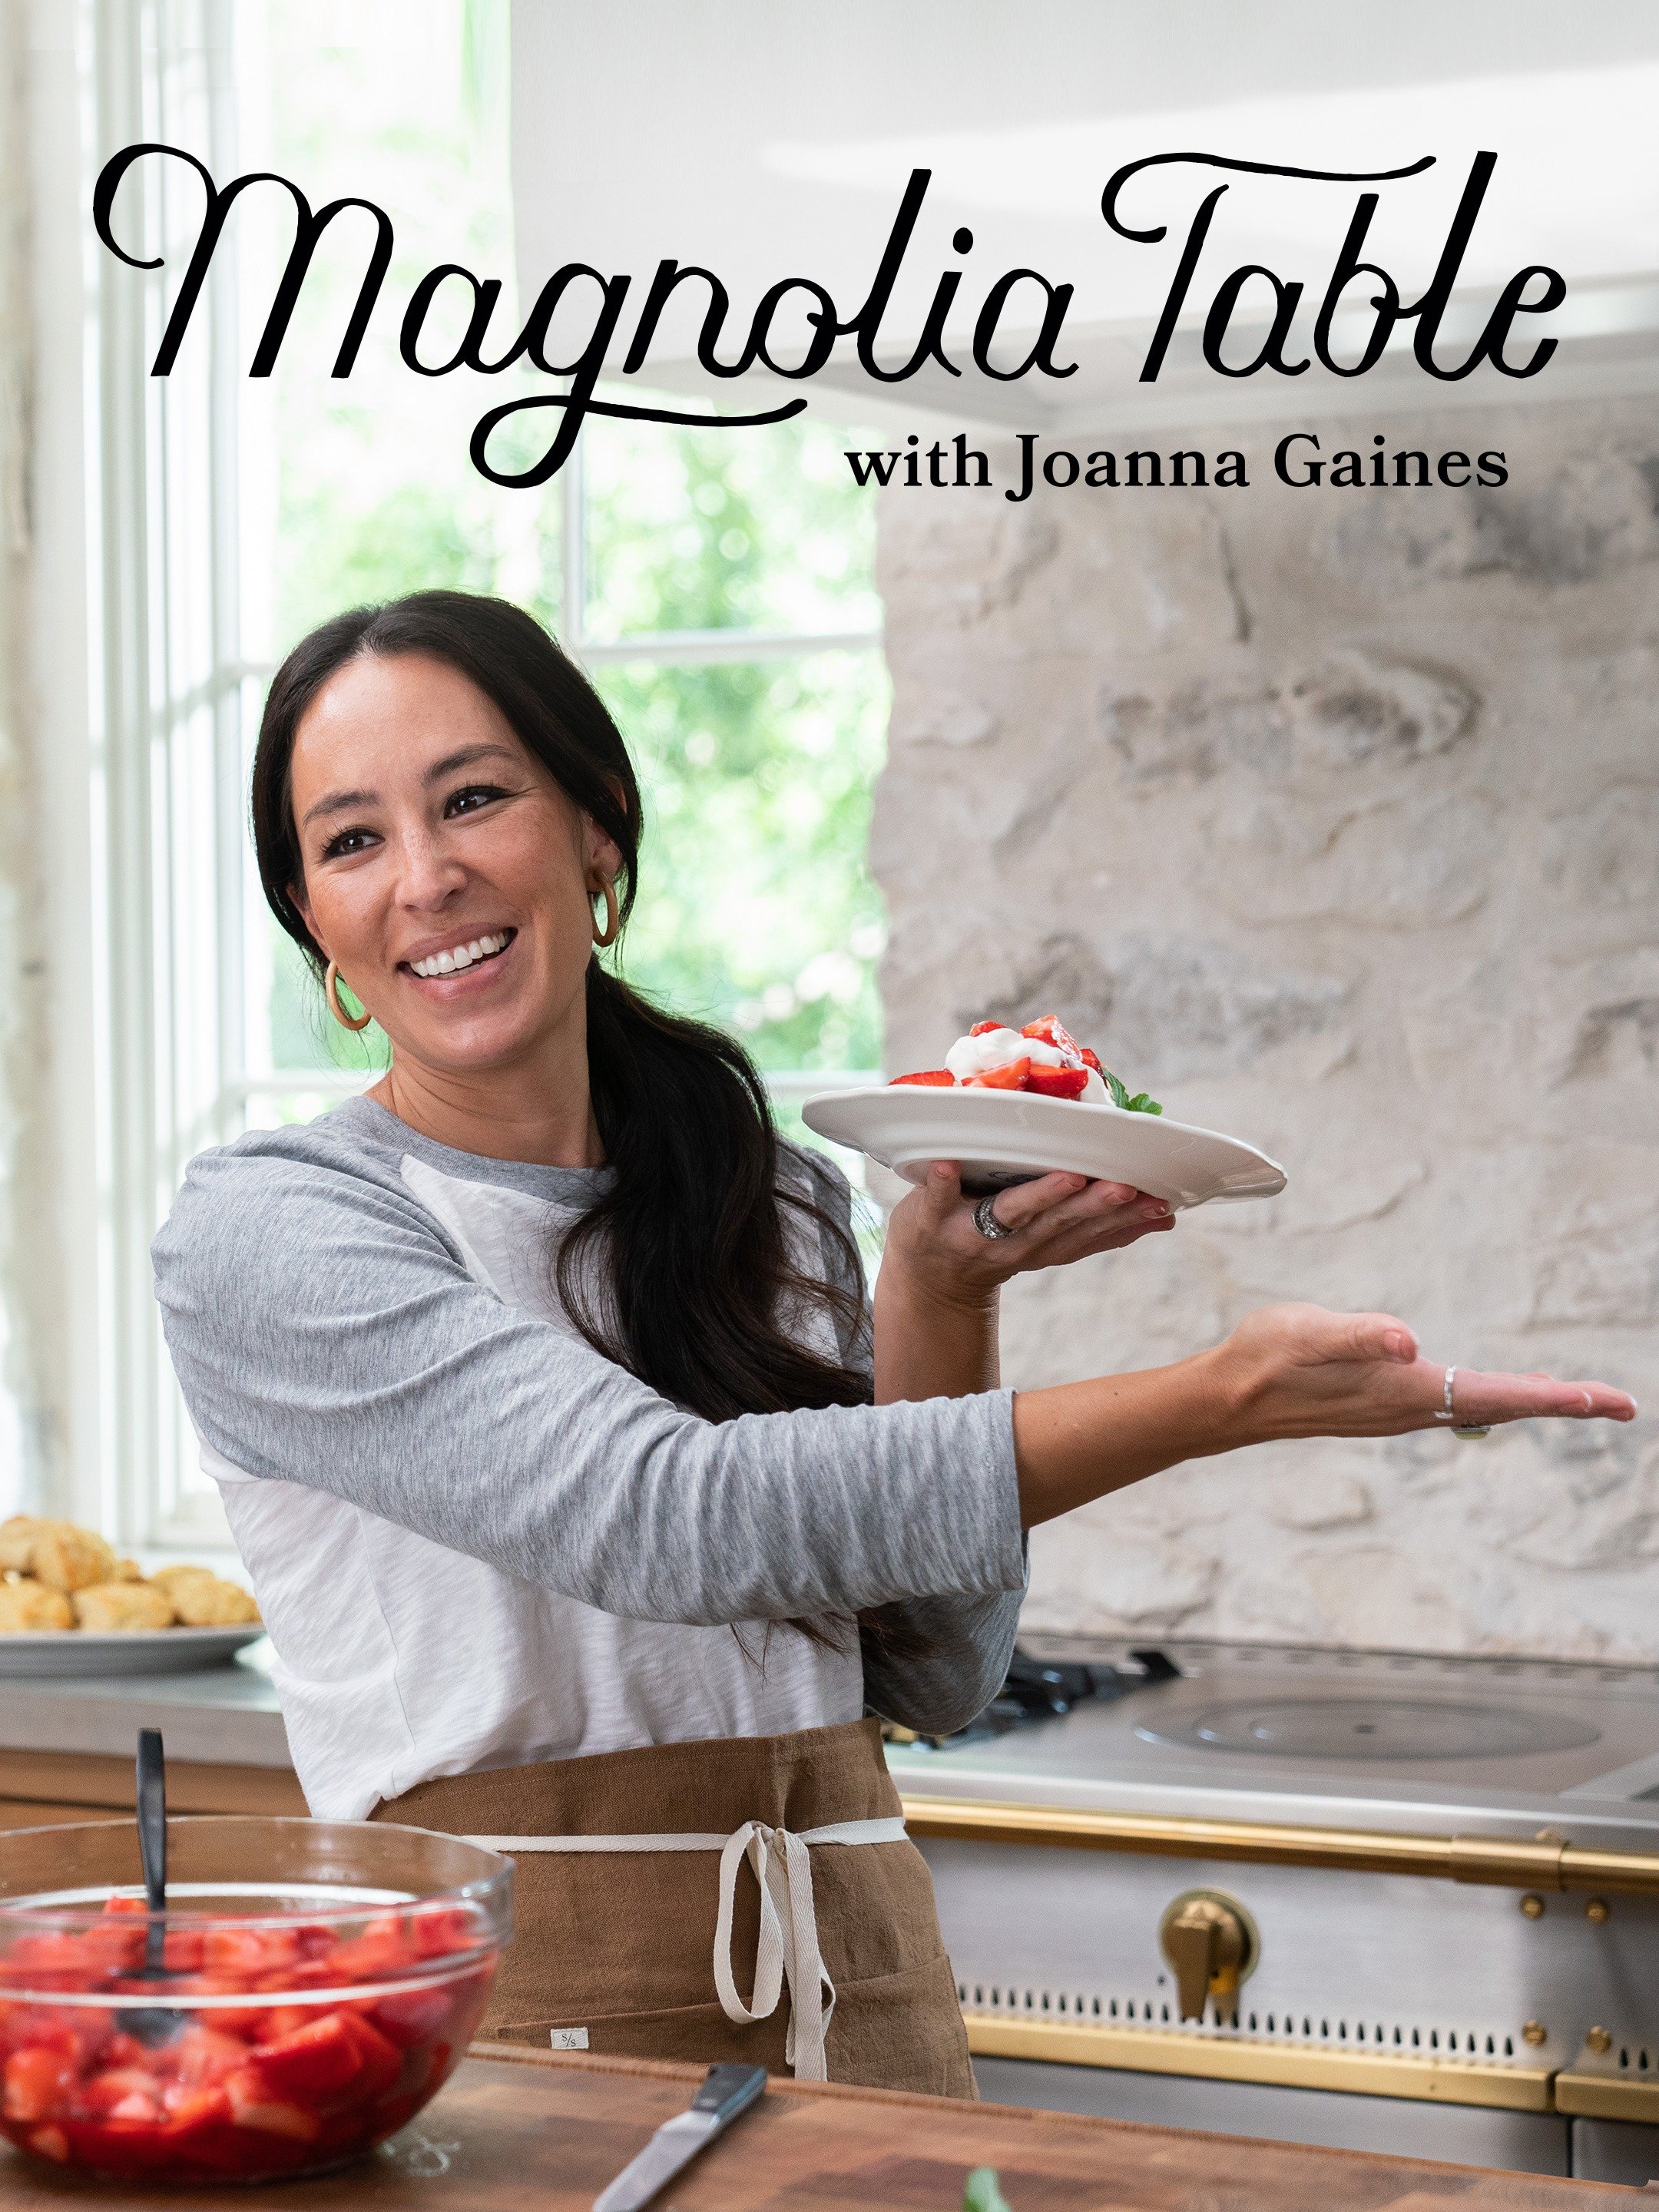 discovery+ 1st Look: The Making of Magnolia Table With Joanna Gaines Pictur...